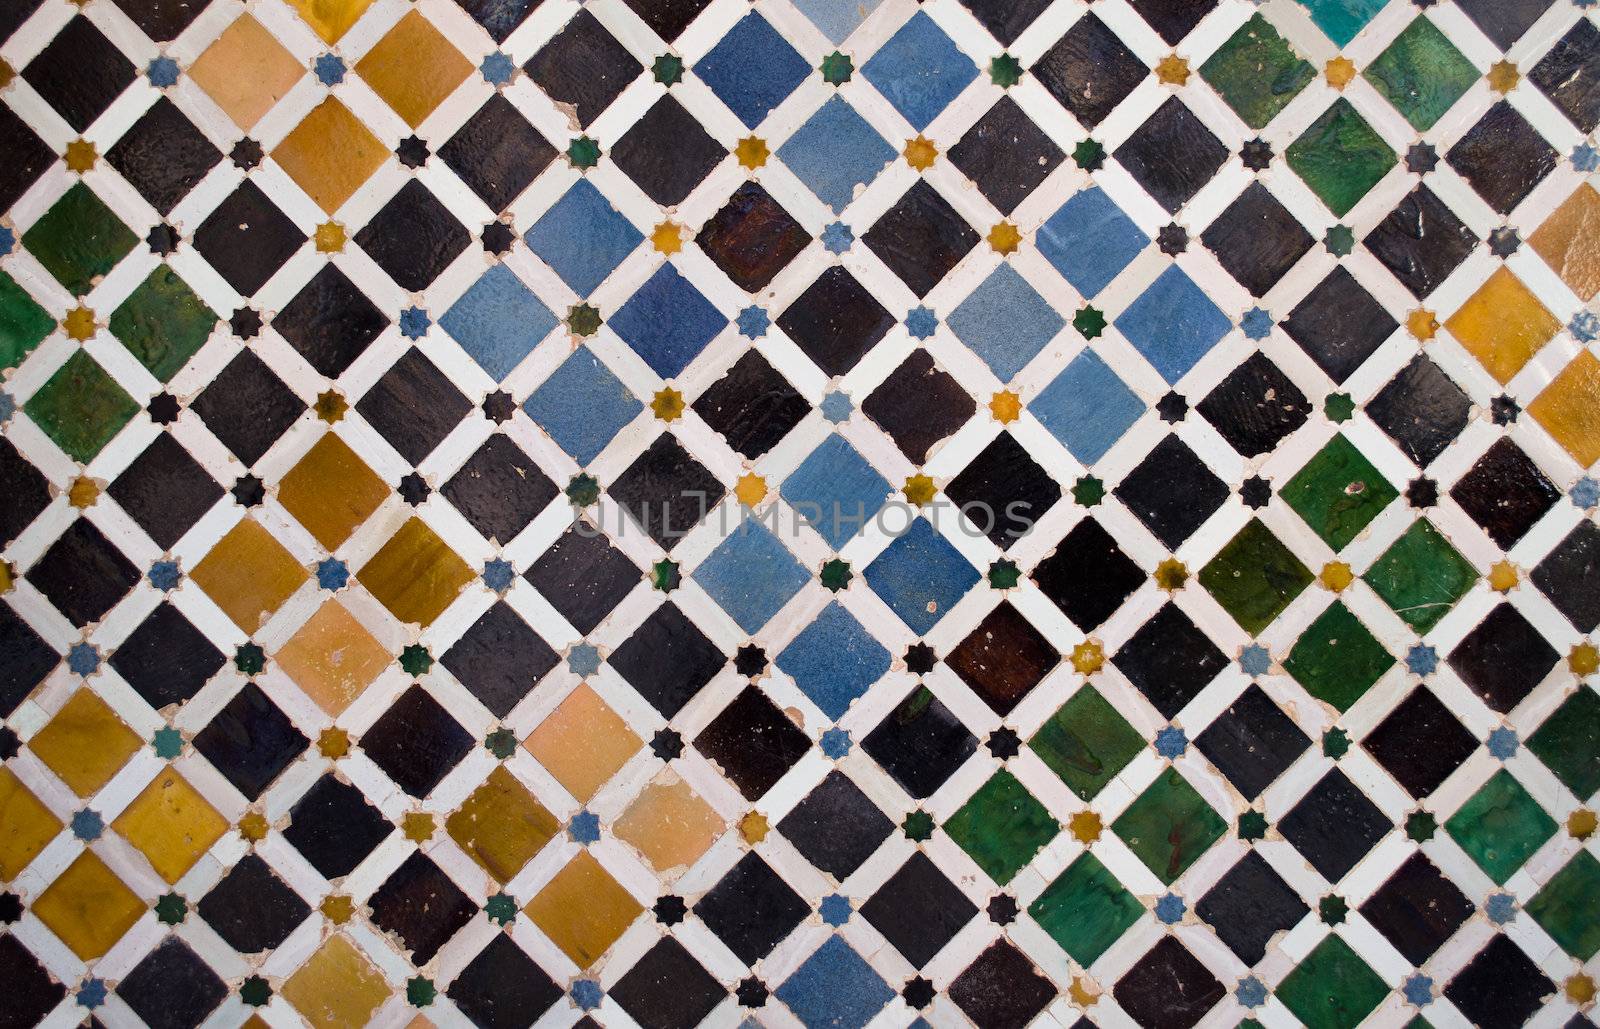 Colorful tiles, arabic style, in the Alhambra, Granada by artofphoto